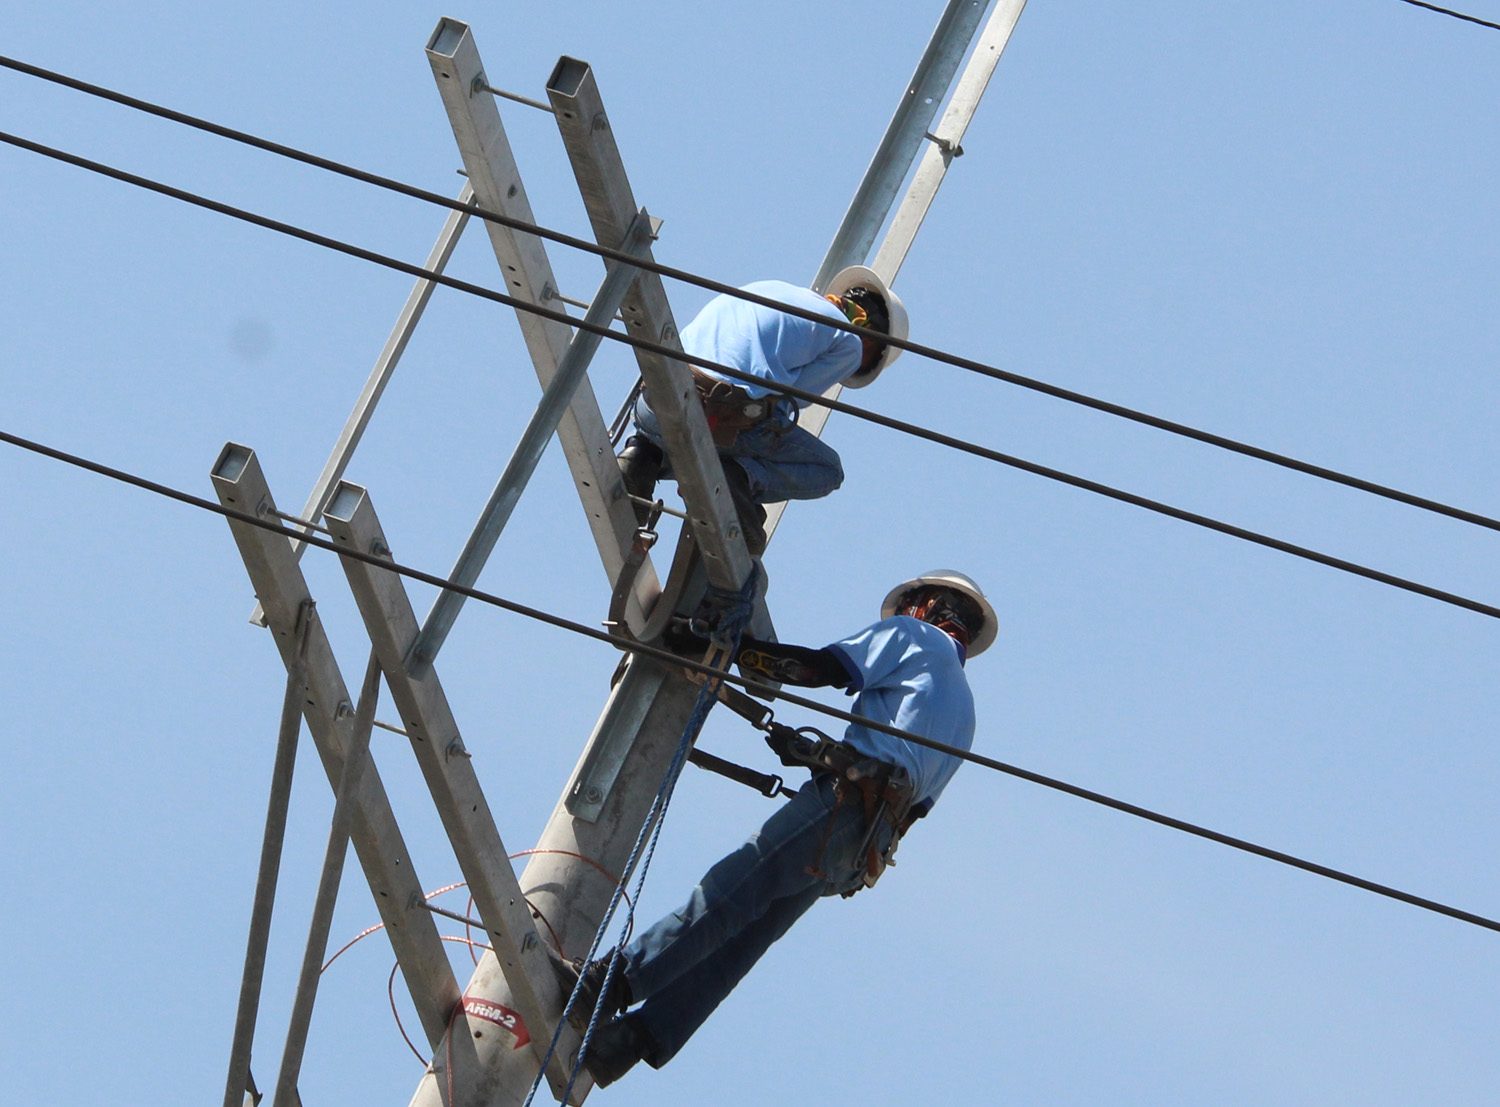 NGCP raises red alert over Luzon grid